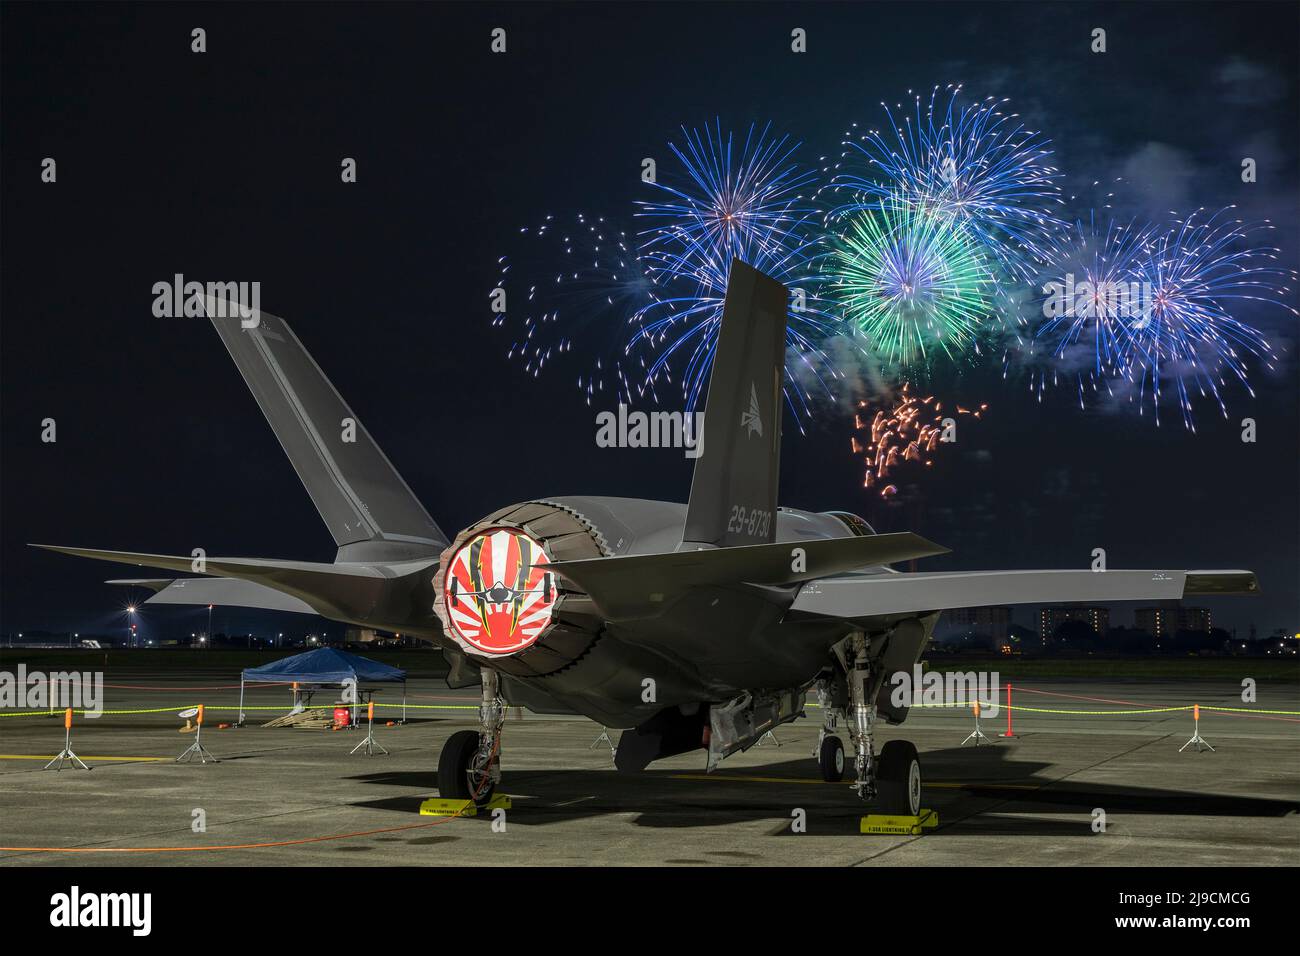 Fussa, Japan. 21st May, 2022. A Japan Air Self-Defense Force F-35A Lightning II Joint Strike Fighter assigned to the 301st Tactical Fighter Squadron sits on the flight-line during a fireworks show part of the Japanese-American Friendship Festival at Yokota Air Base during the Japanese-American Friendship Festival at Yokota Air Base, May 21, 2022 in Fussa, Japan. Credit: Yasuo Osakabe/U.S. Air Force/Alamy Live News Stock Photo